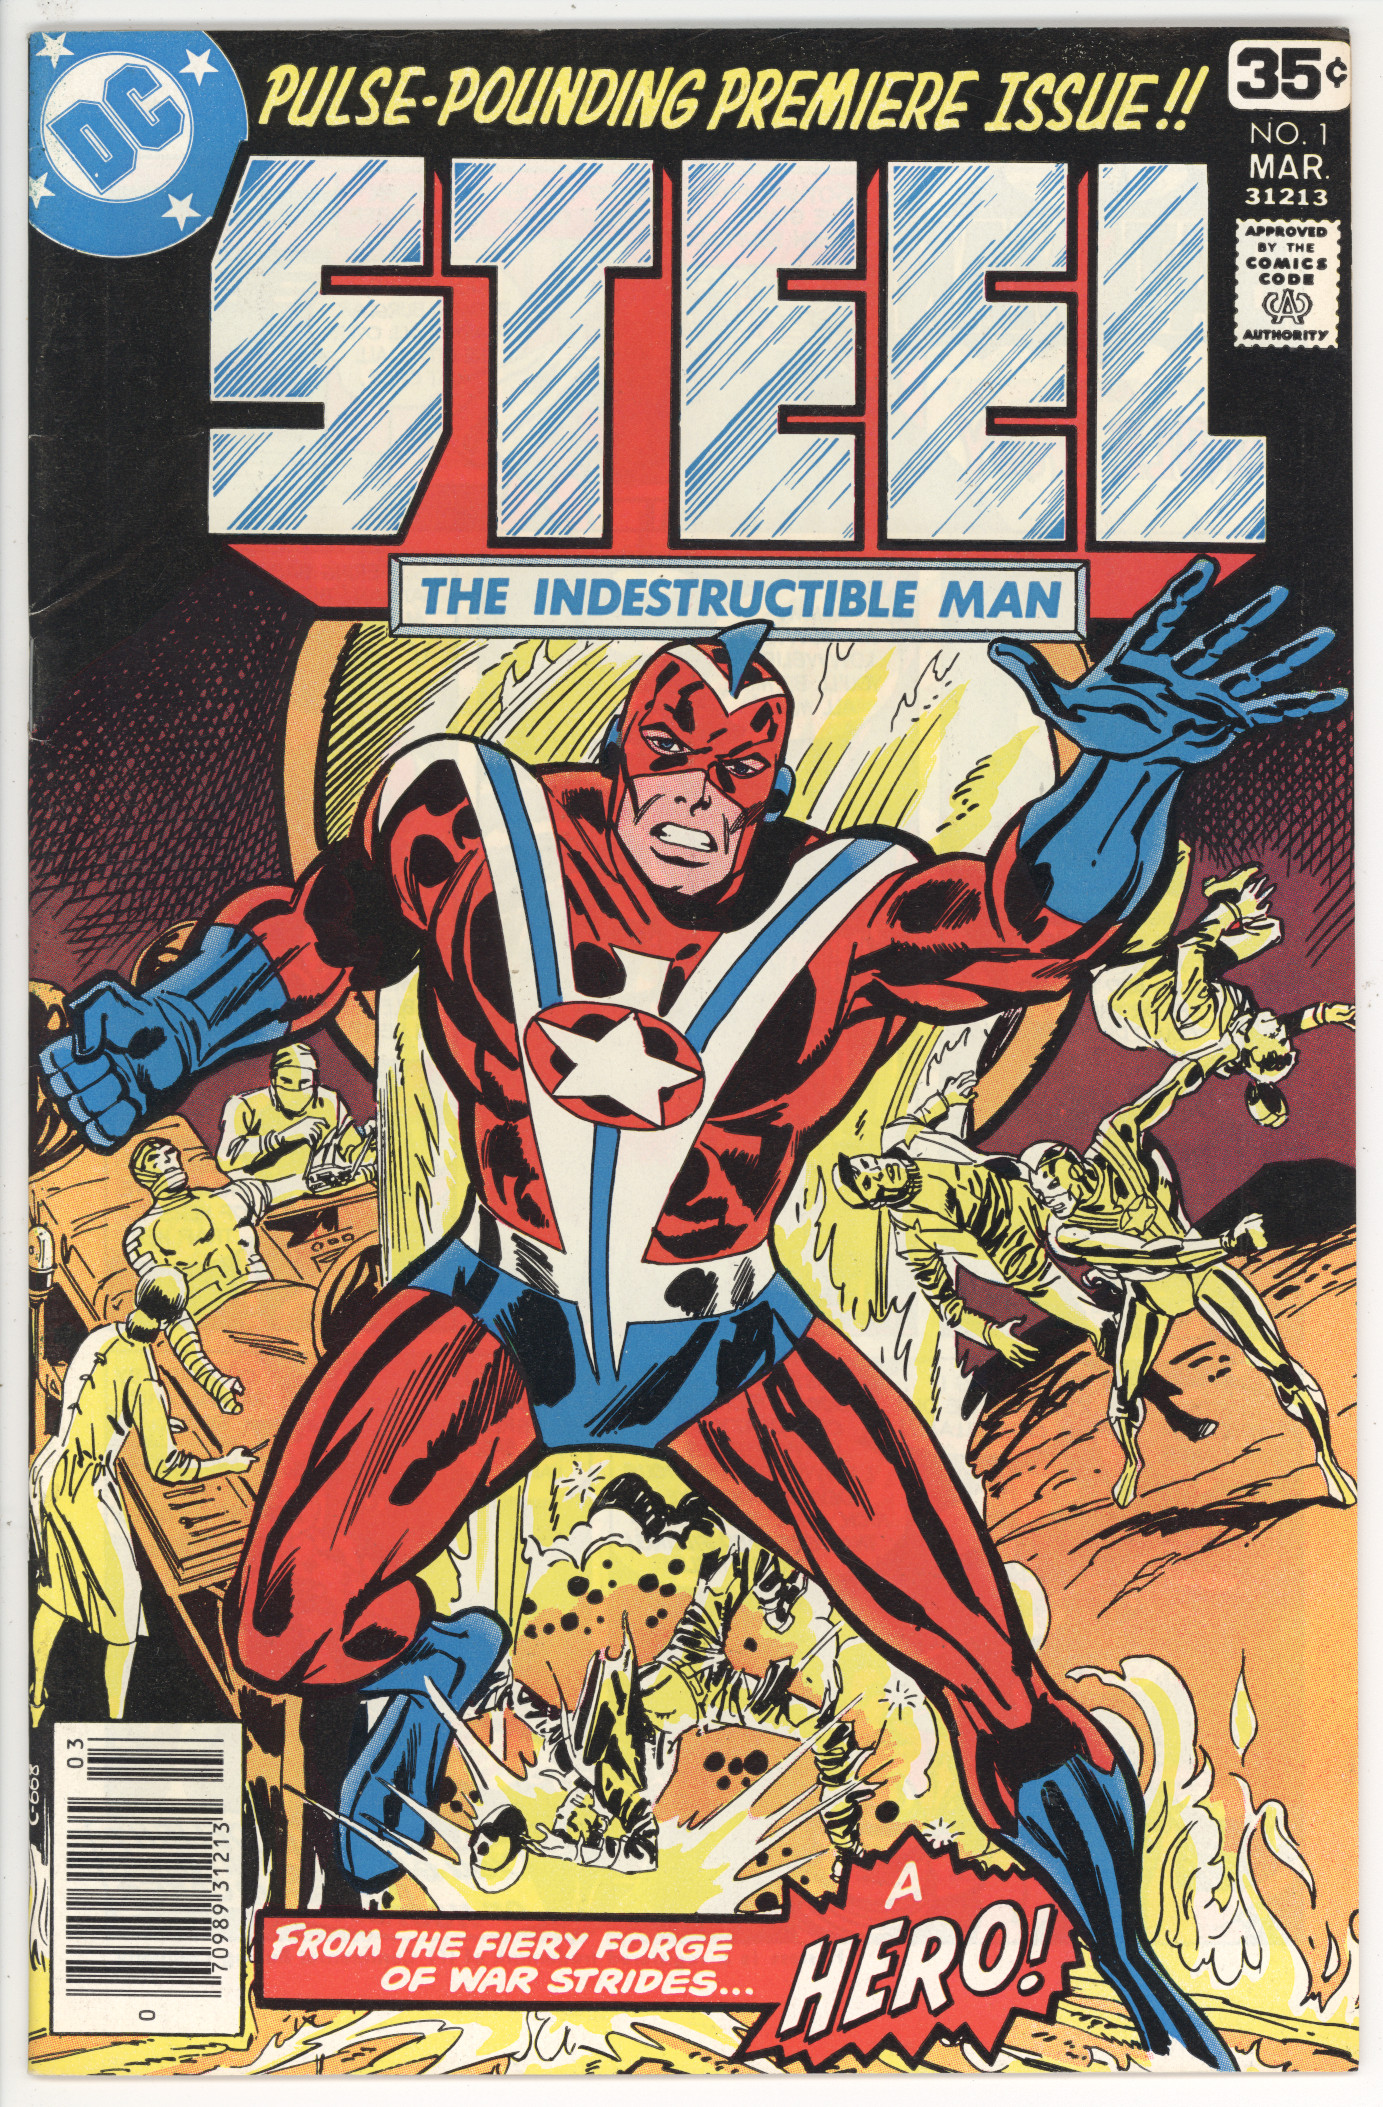 Steel The Indestructible Man #1 front